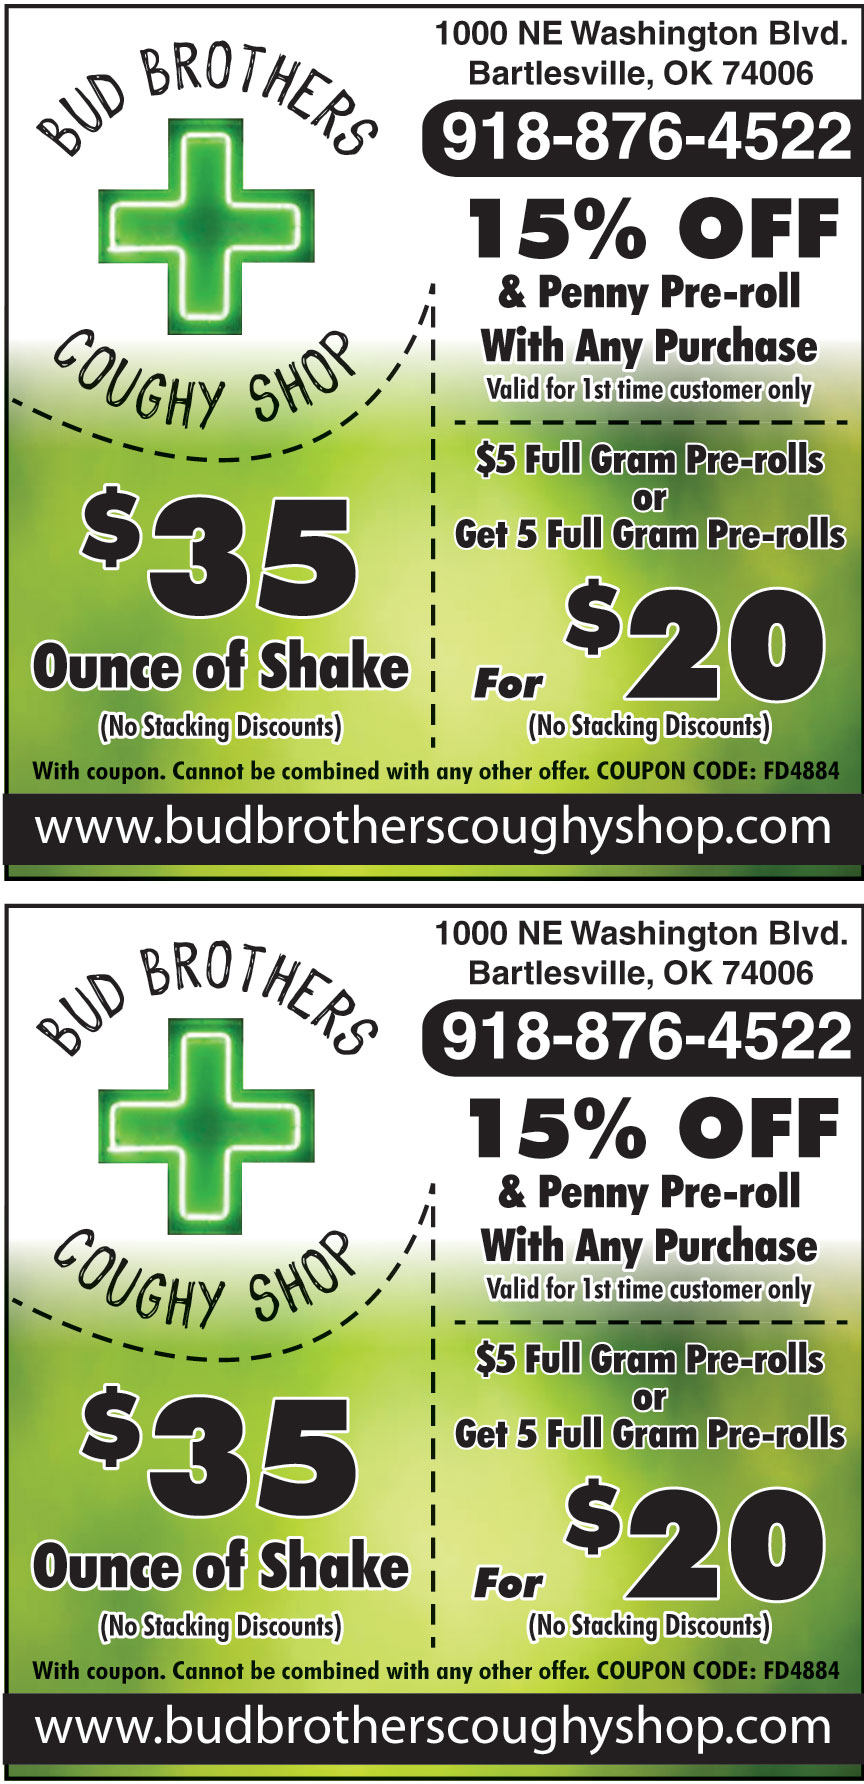 BUD BROTHERS COUGHY SHOP